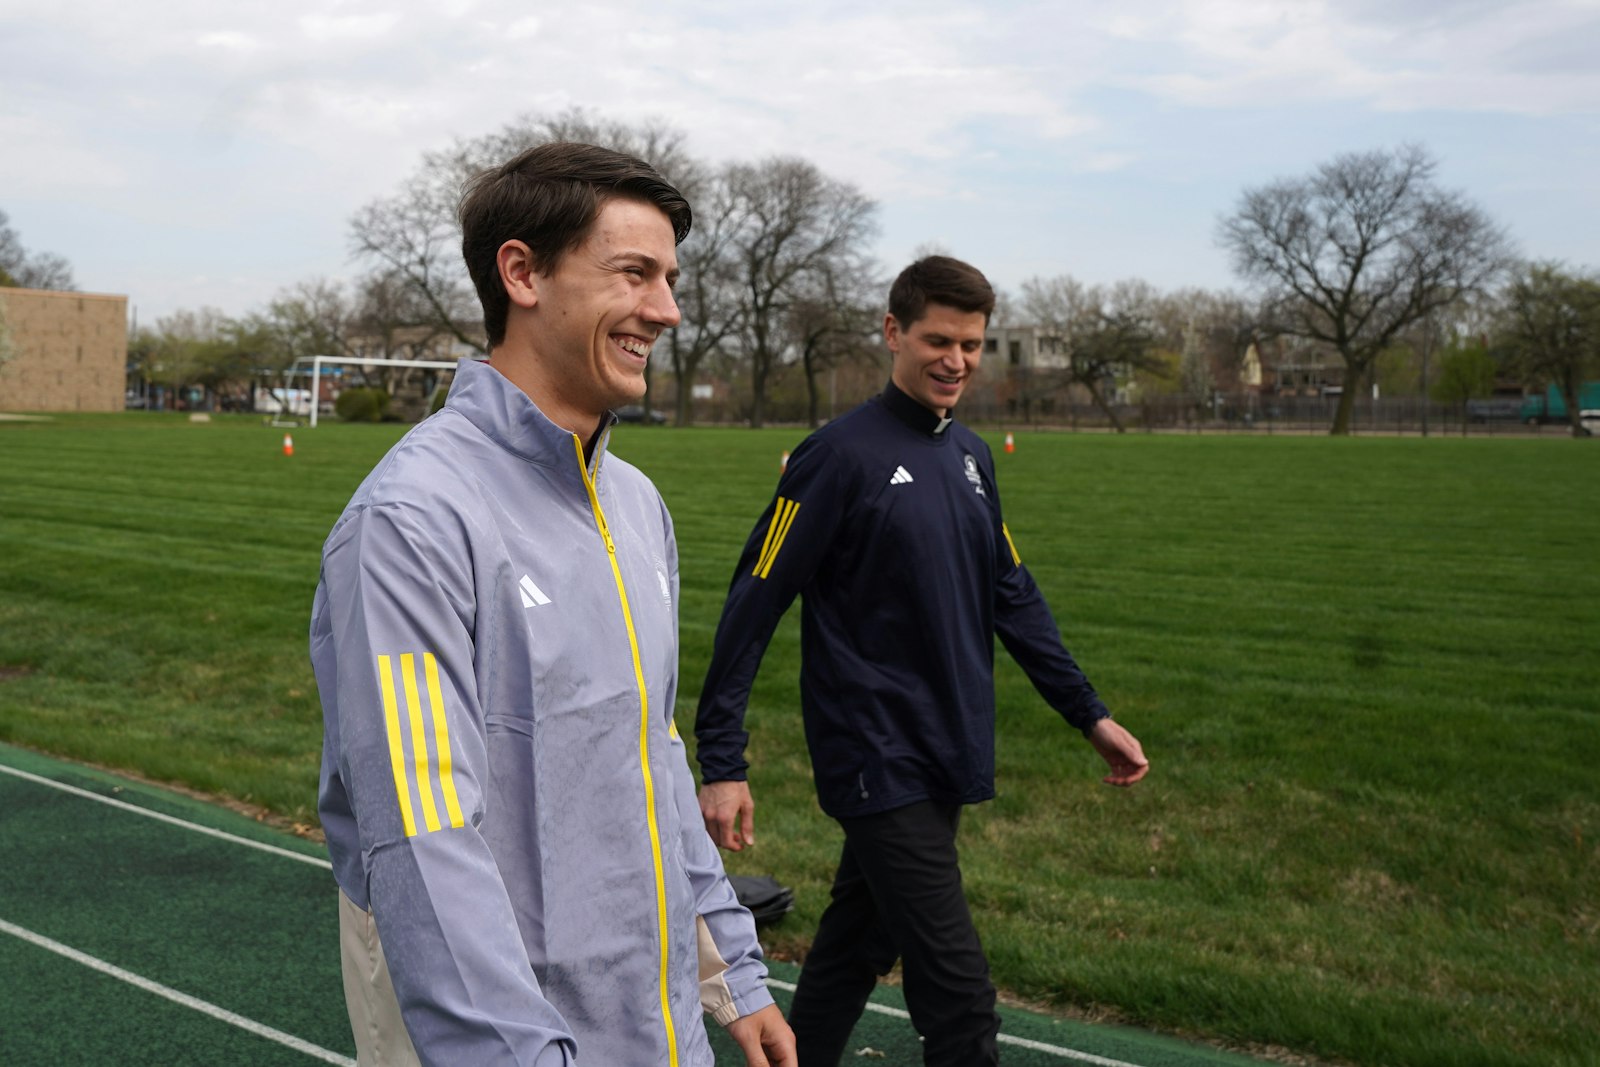 Matthew Conner and Deacon Seamus Kettner walk the track at Sacred Heart Major Seminary. Conner finished the Boston Marathon in 2 hours, 55 minutes, and 10 seconds, while Deacon Kettner finished the marathon in 2 hours, 42 minutes, and 1 second. (Daniel Meloy | Detroit Catholic)